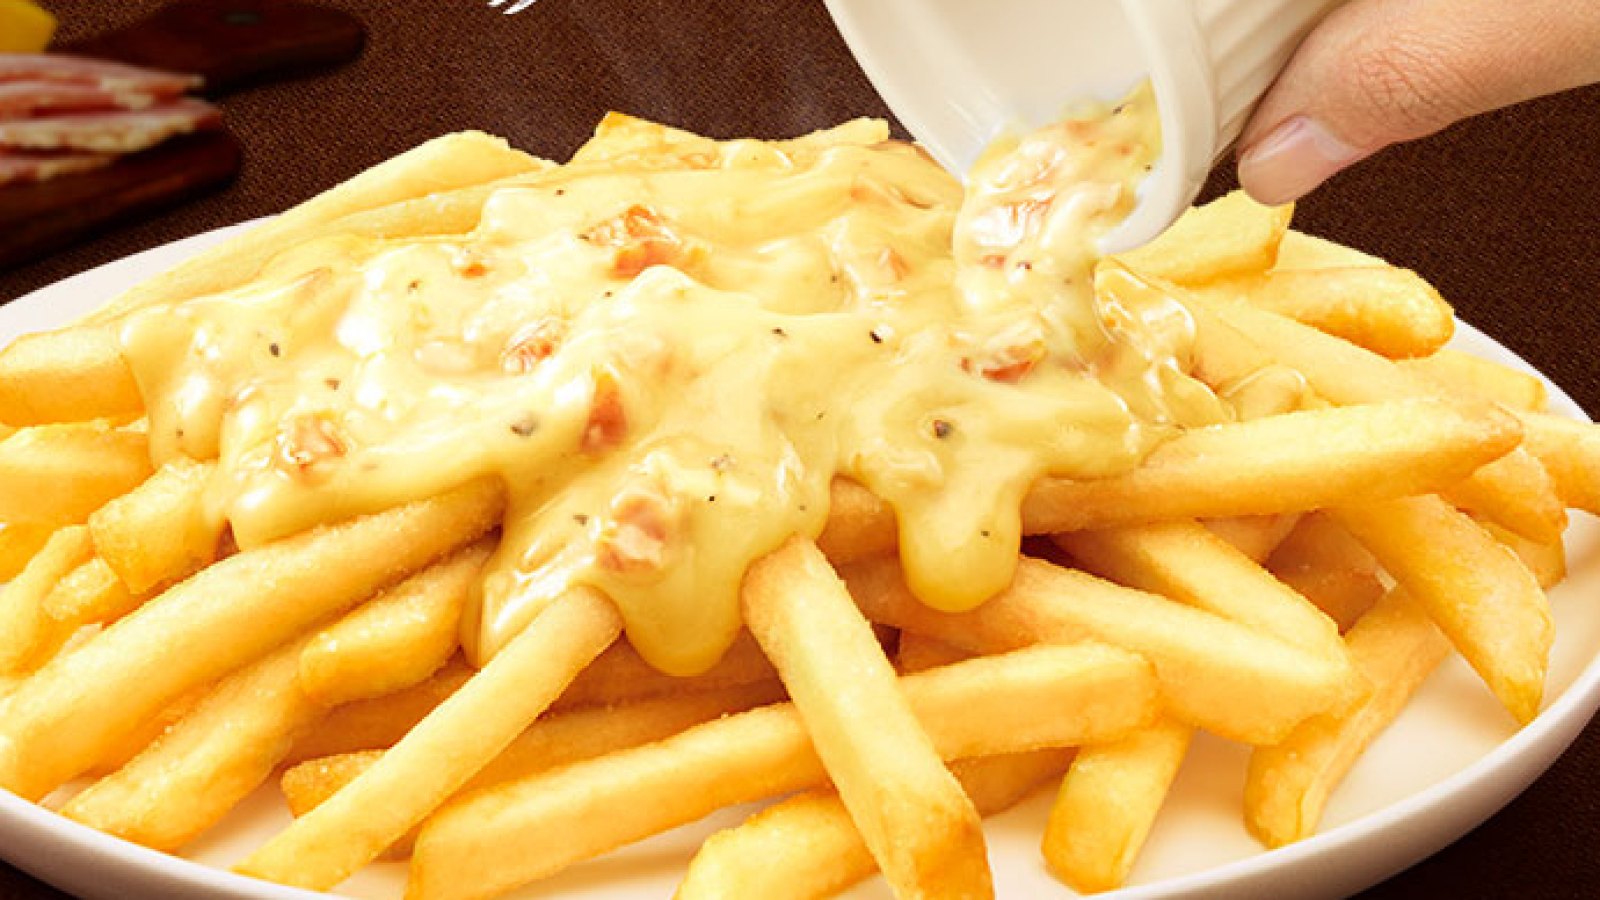 Japanese McDonalds are now serving carbonara french fries.